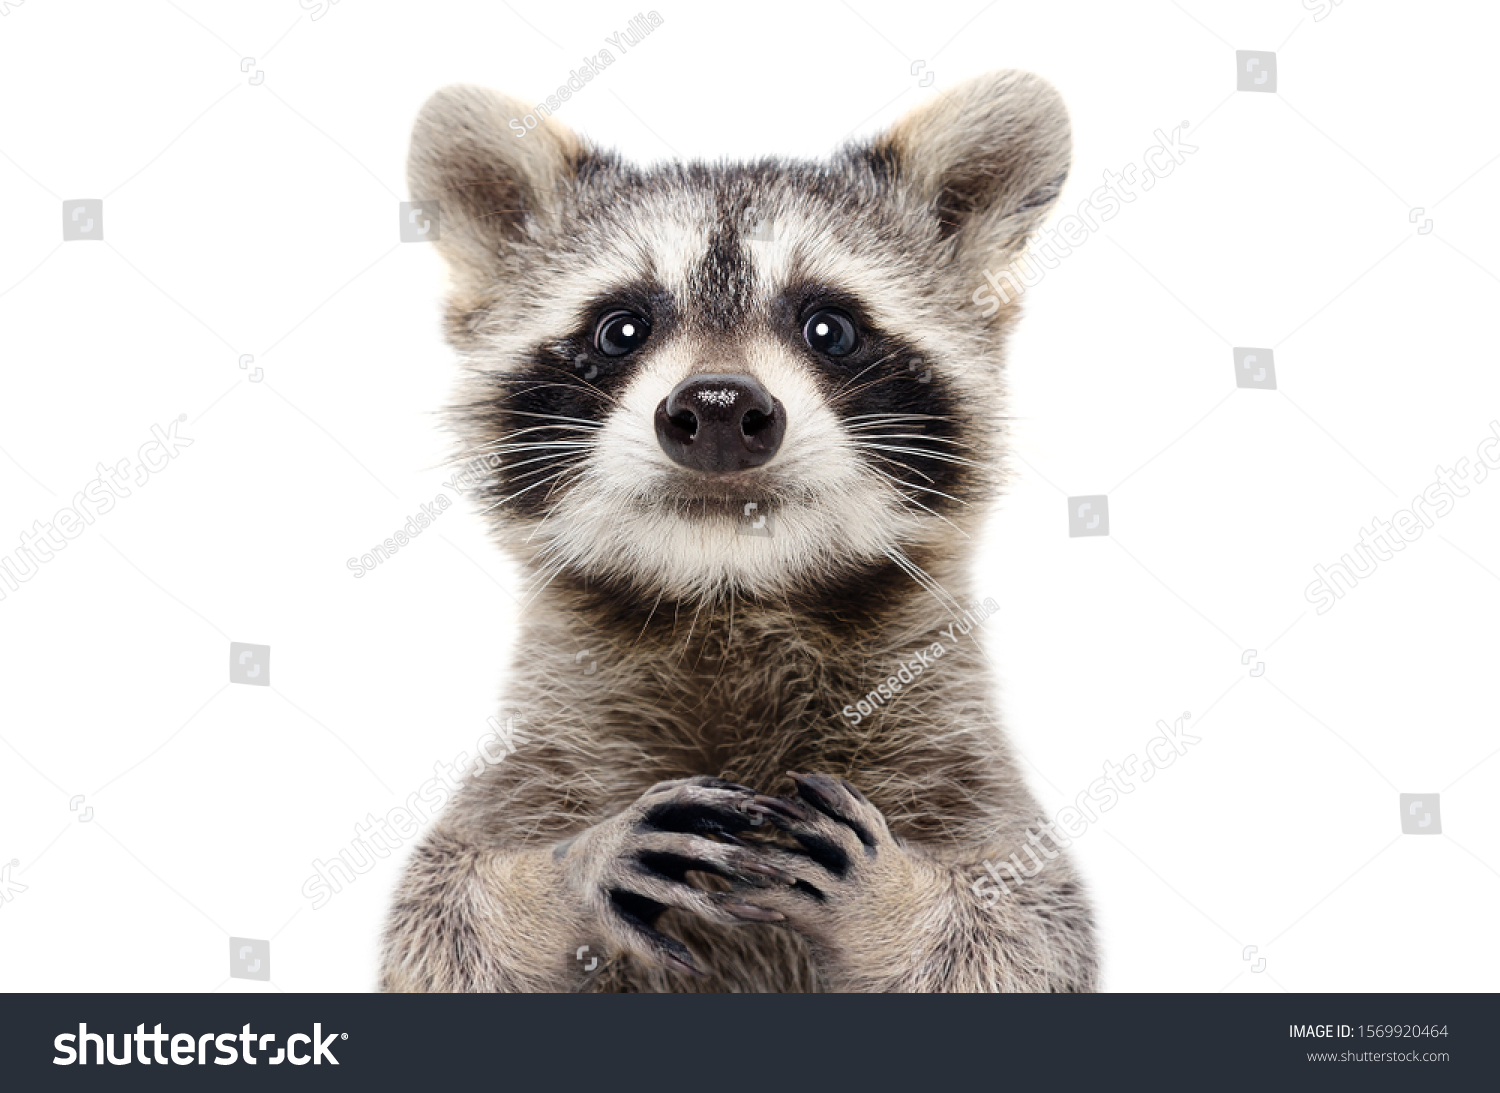 Portrait of a cute funny raccoon, closeup, isolated on a white background